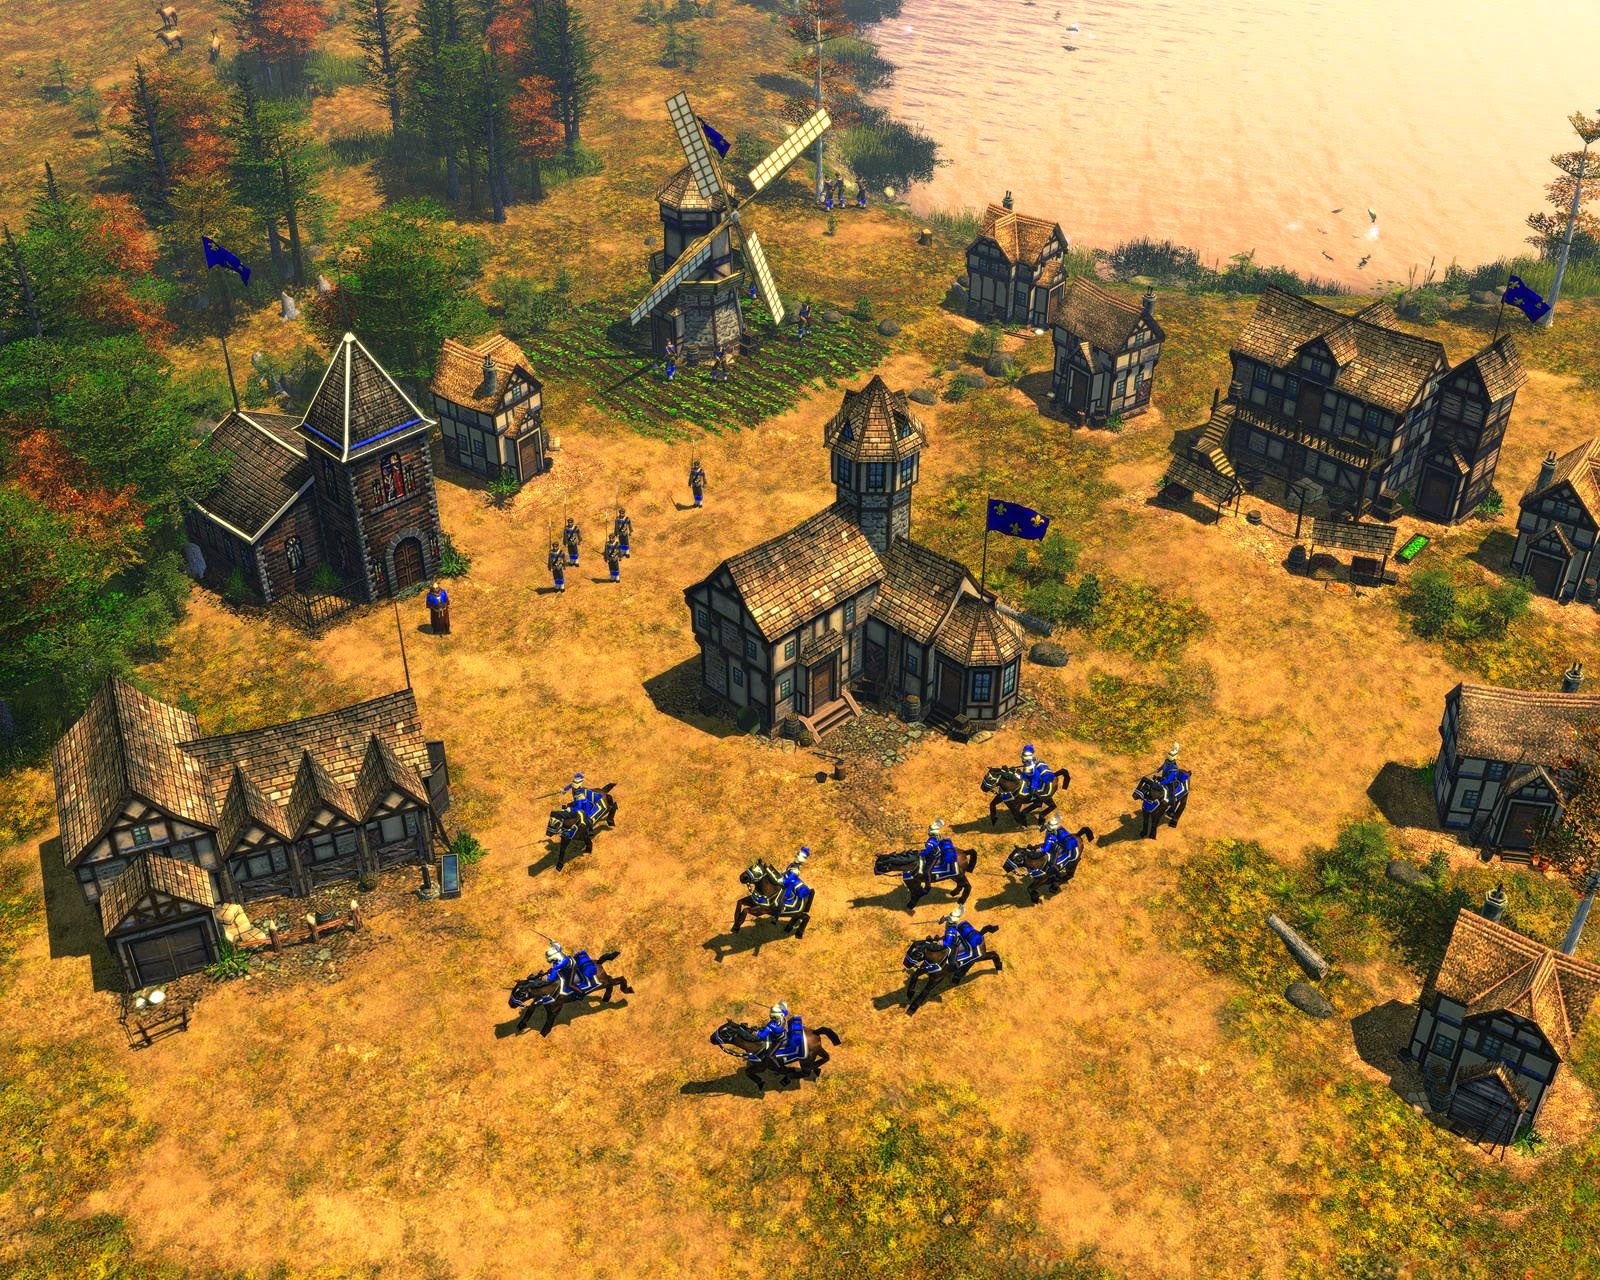 age of empires age of kings download full version free